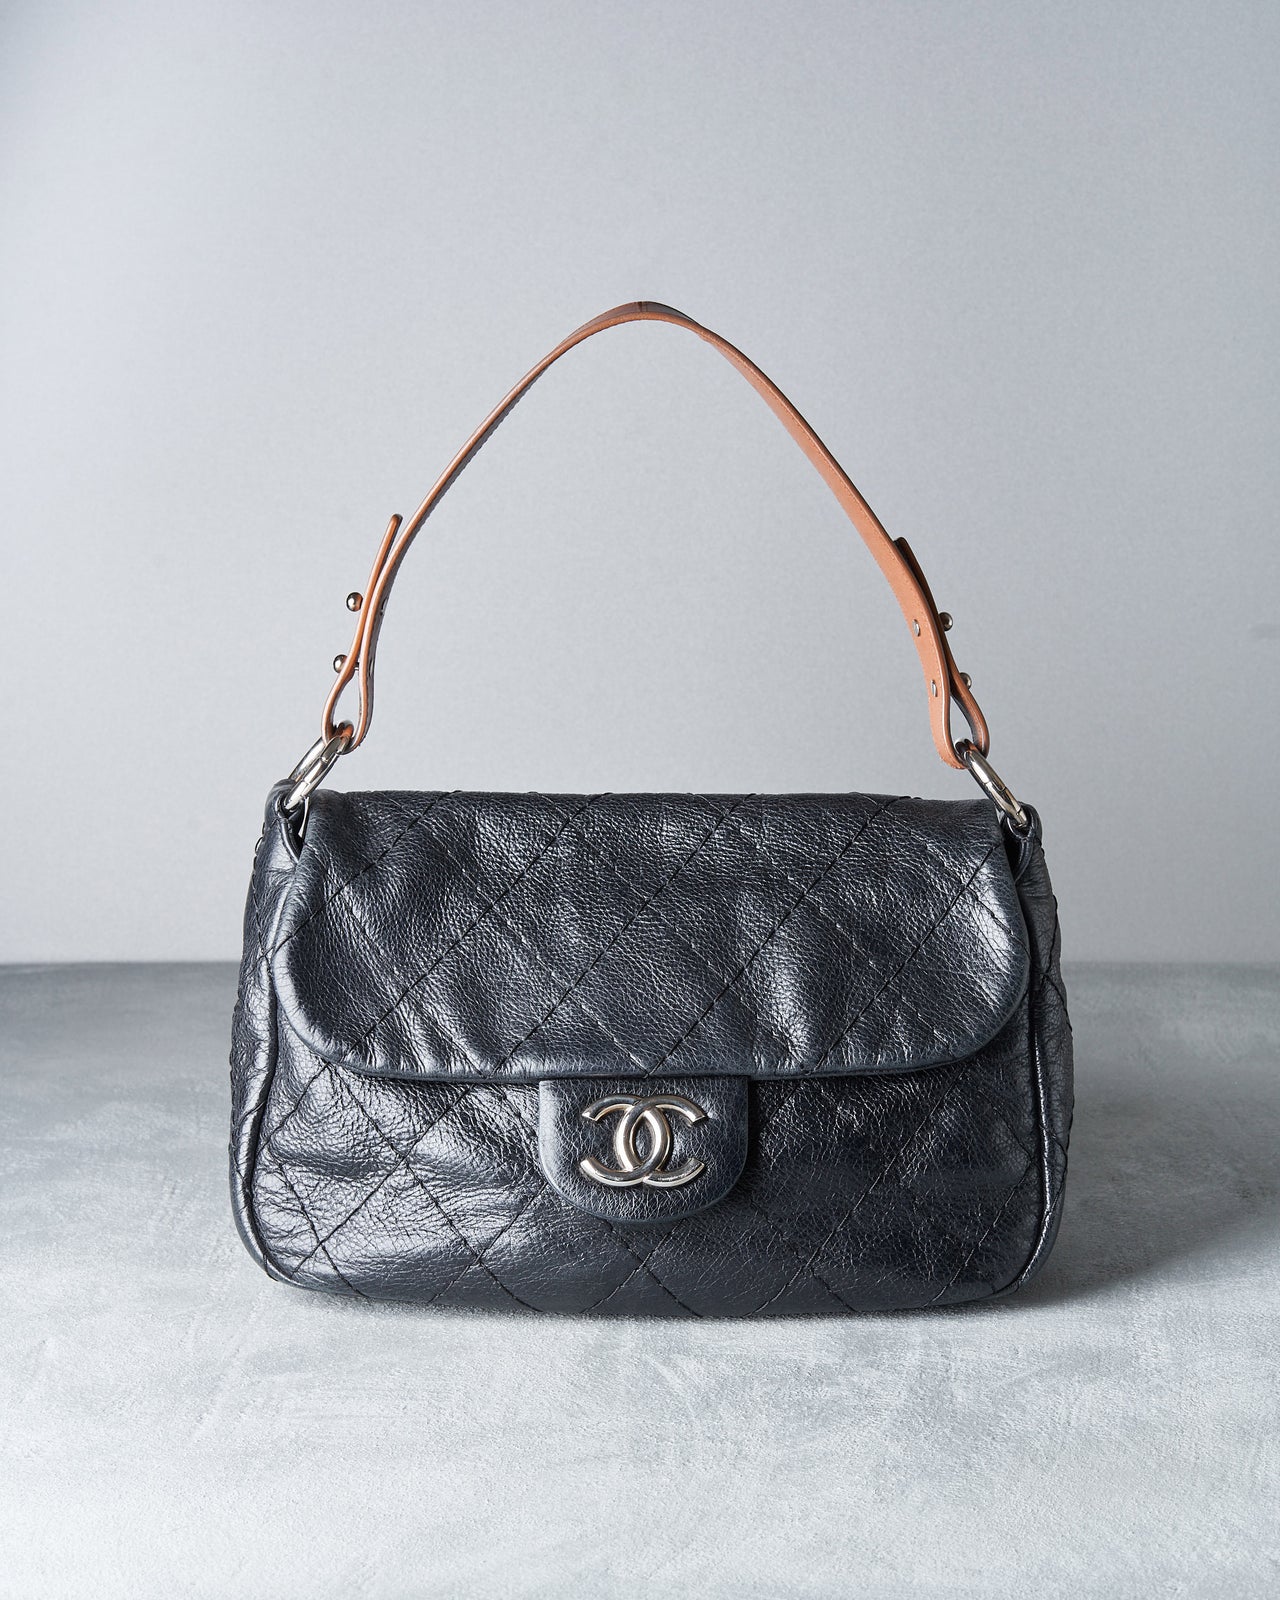 Chanel 2011 "On the Road" Caviar flap bag